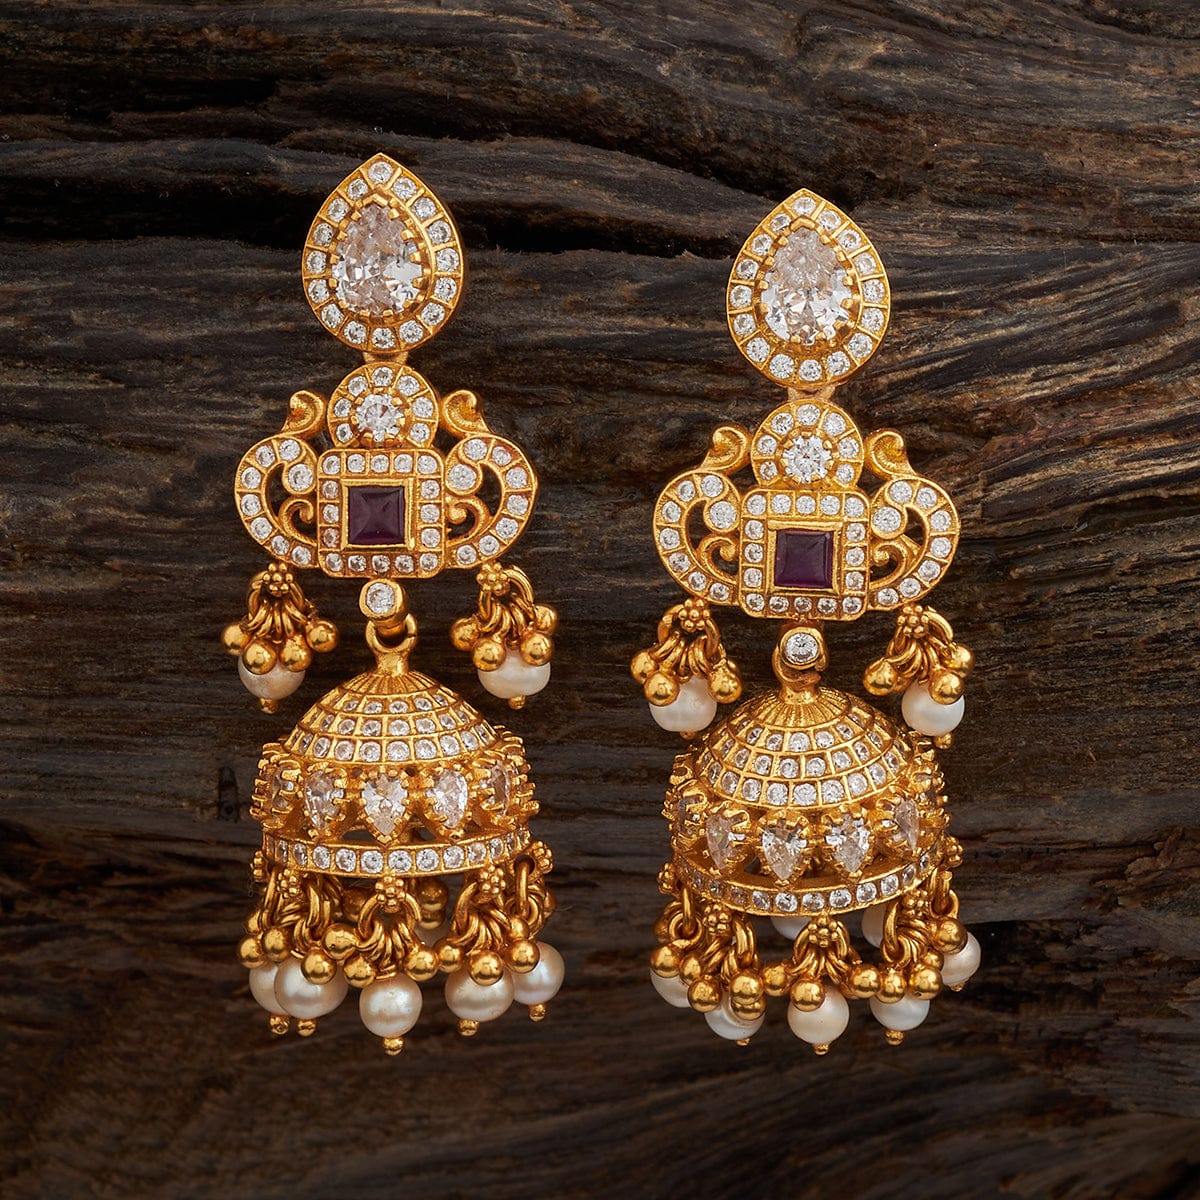 Dazzling Earrings From Kushal's Fashion Jewellery - South India Jewels